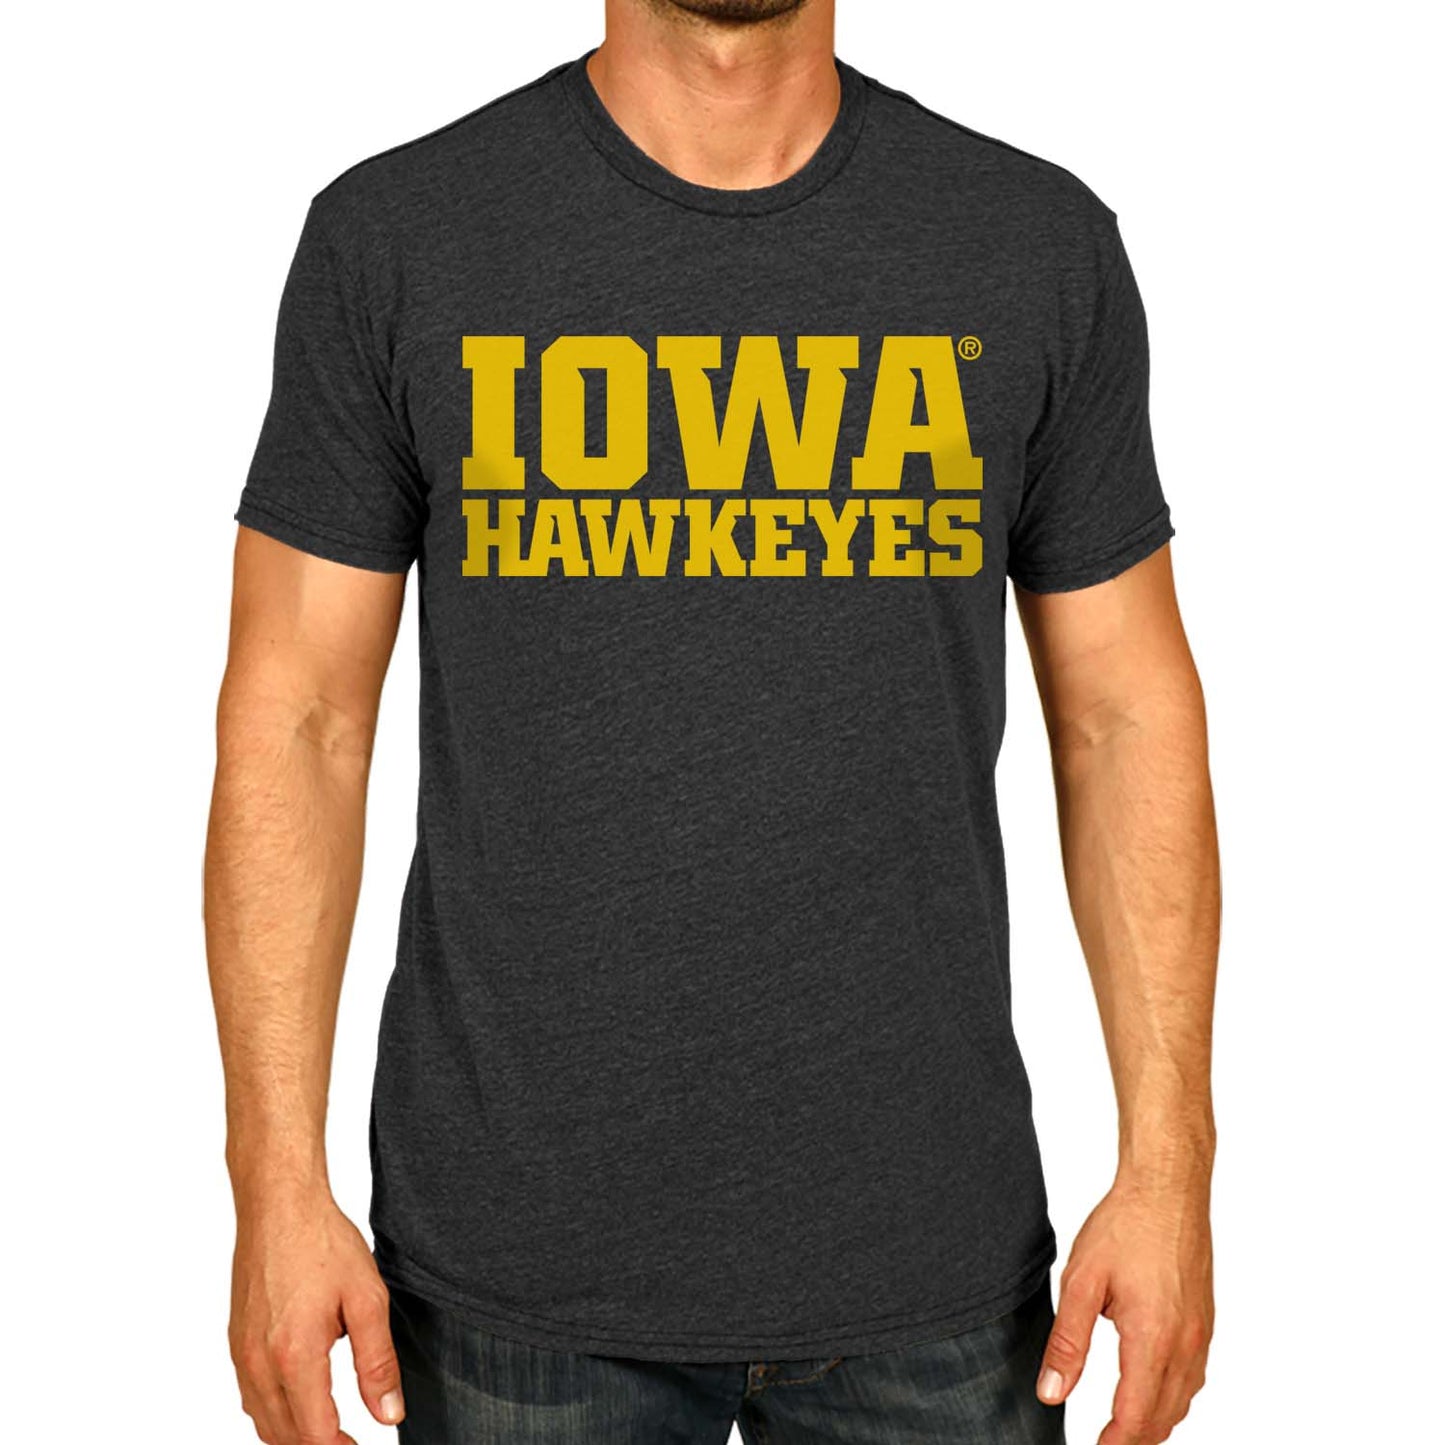 Iowa Hawkeyes Campus Colors NCAA Adult Cotton Blend Charcoal Tagless T-Shirt - Charcoal